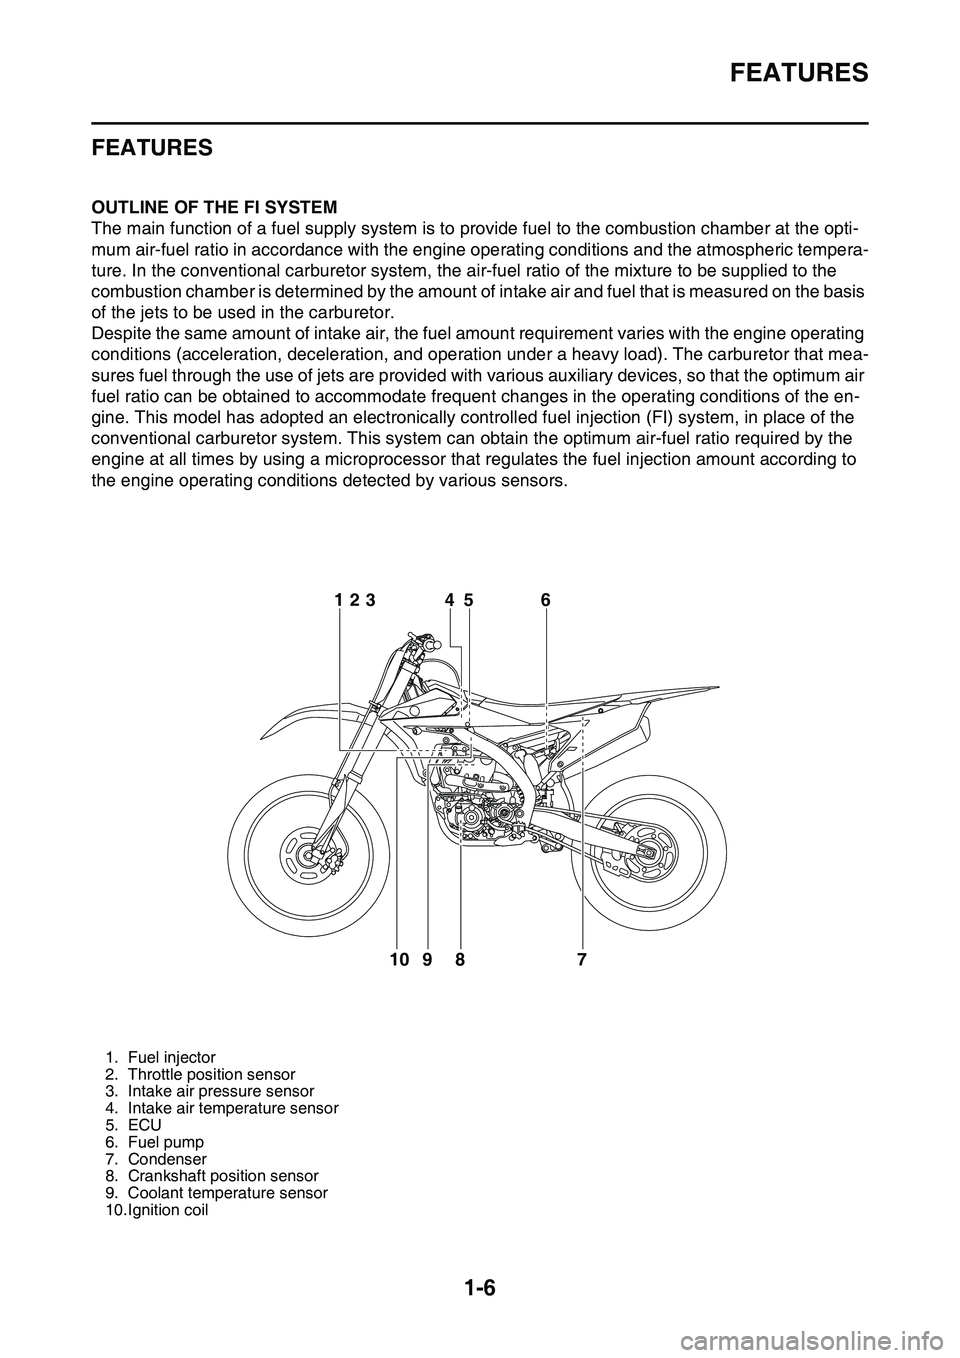 YAMAHA YZ450F 2014 User Guide FEATURES
1-6
EAS20170
FEATURES
EAS1SL1014OUTLINE OF THE FI SYSTEM
The main function of a fuel supply system is to provide fuel to the combustion chamber at the opti-
mum air-fuel ratio in accordance w